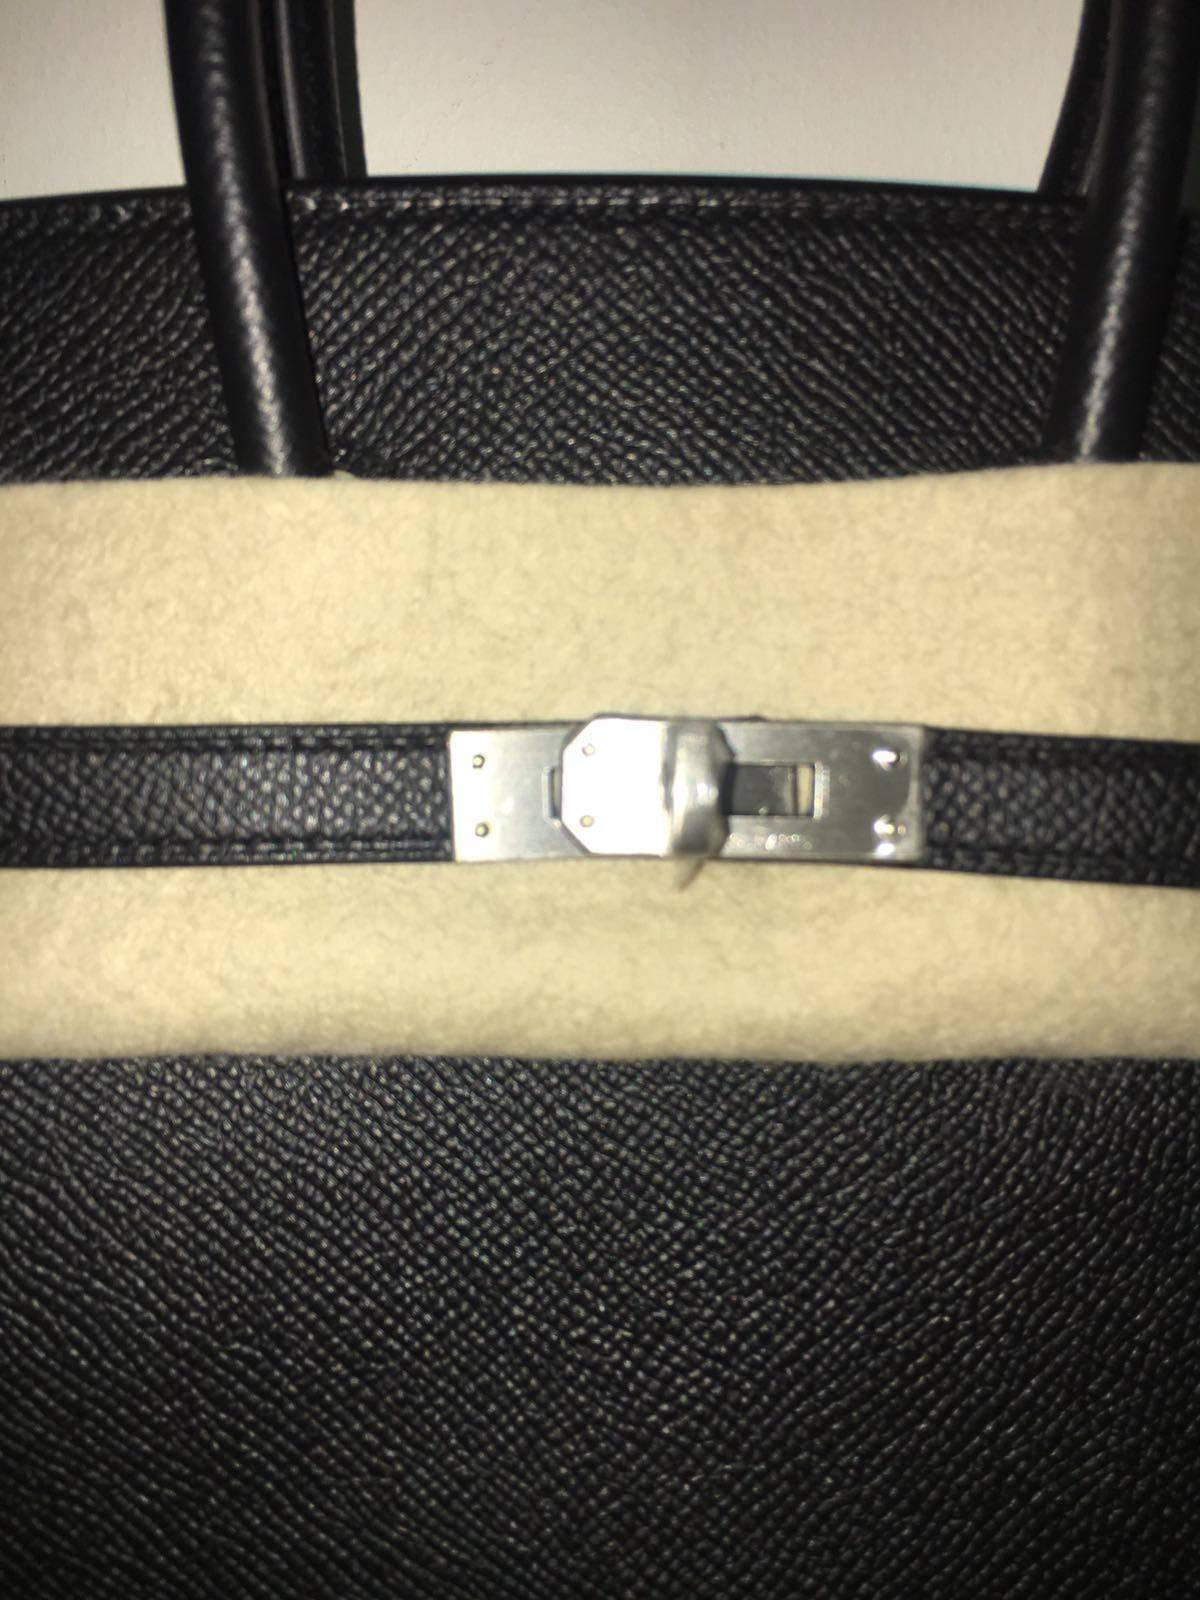 Hermes 
Birkin Size 25
Epsom Leather 
Colour Black
Brushed Silver Hardware
store fresh, comes with receipt and full set (dust bag, box...) 
Hydeparkfashion specializes in sourcing and delivering authentic luxury handbags, mainly Hermes, to